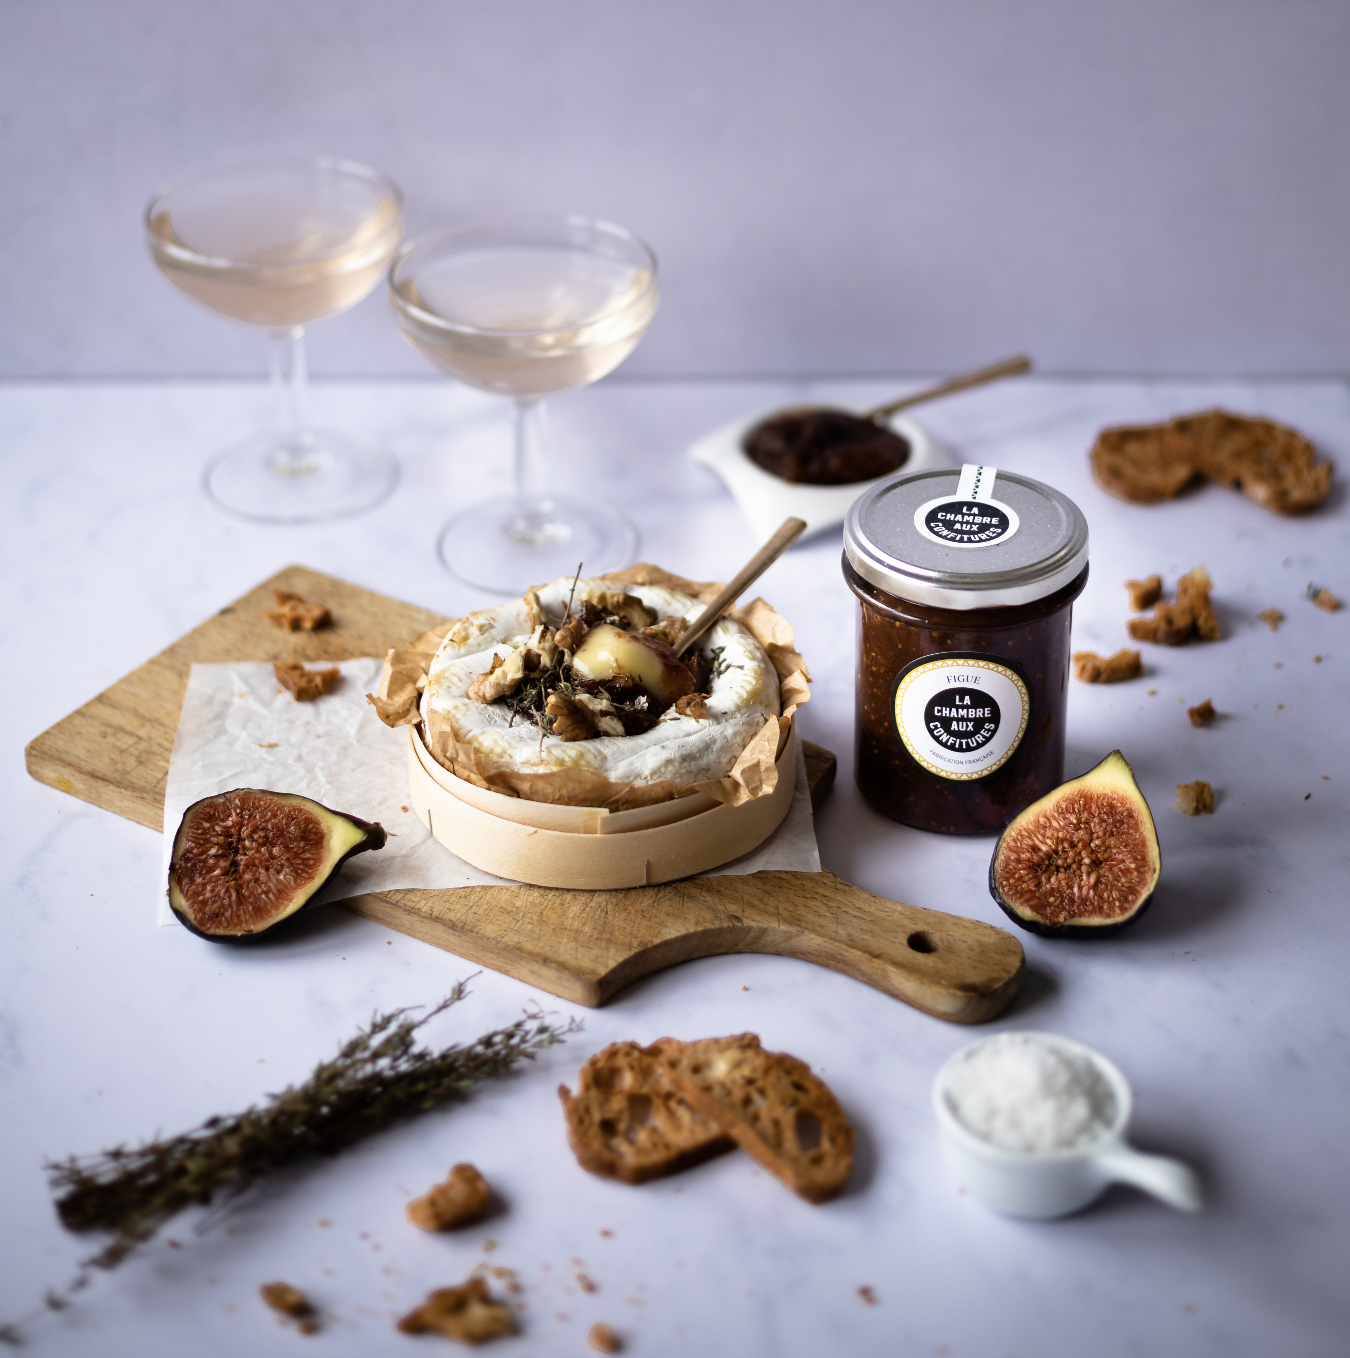 Baked Camembert with Sollies Fig Jam